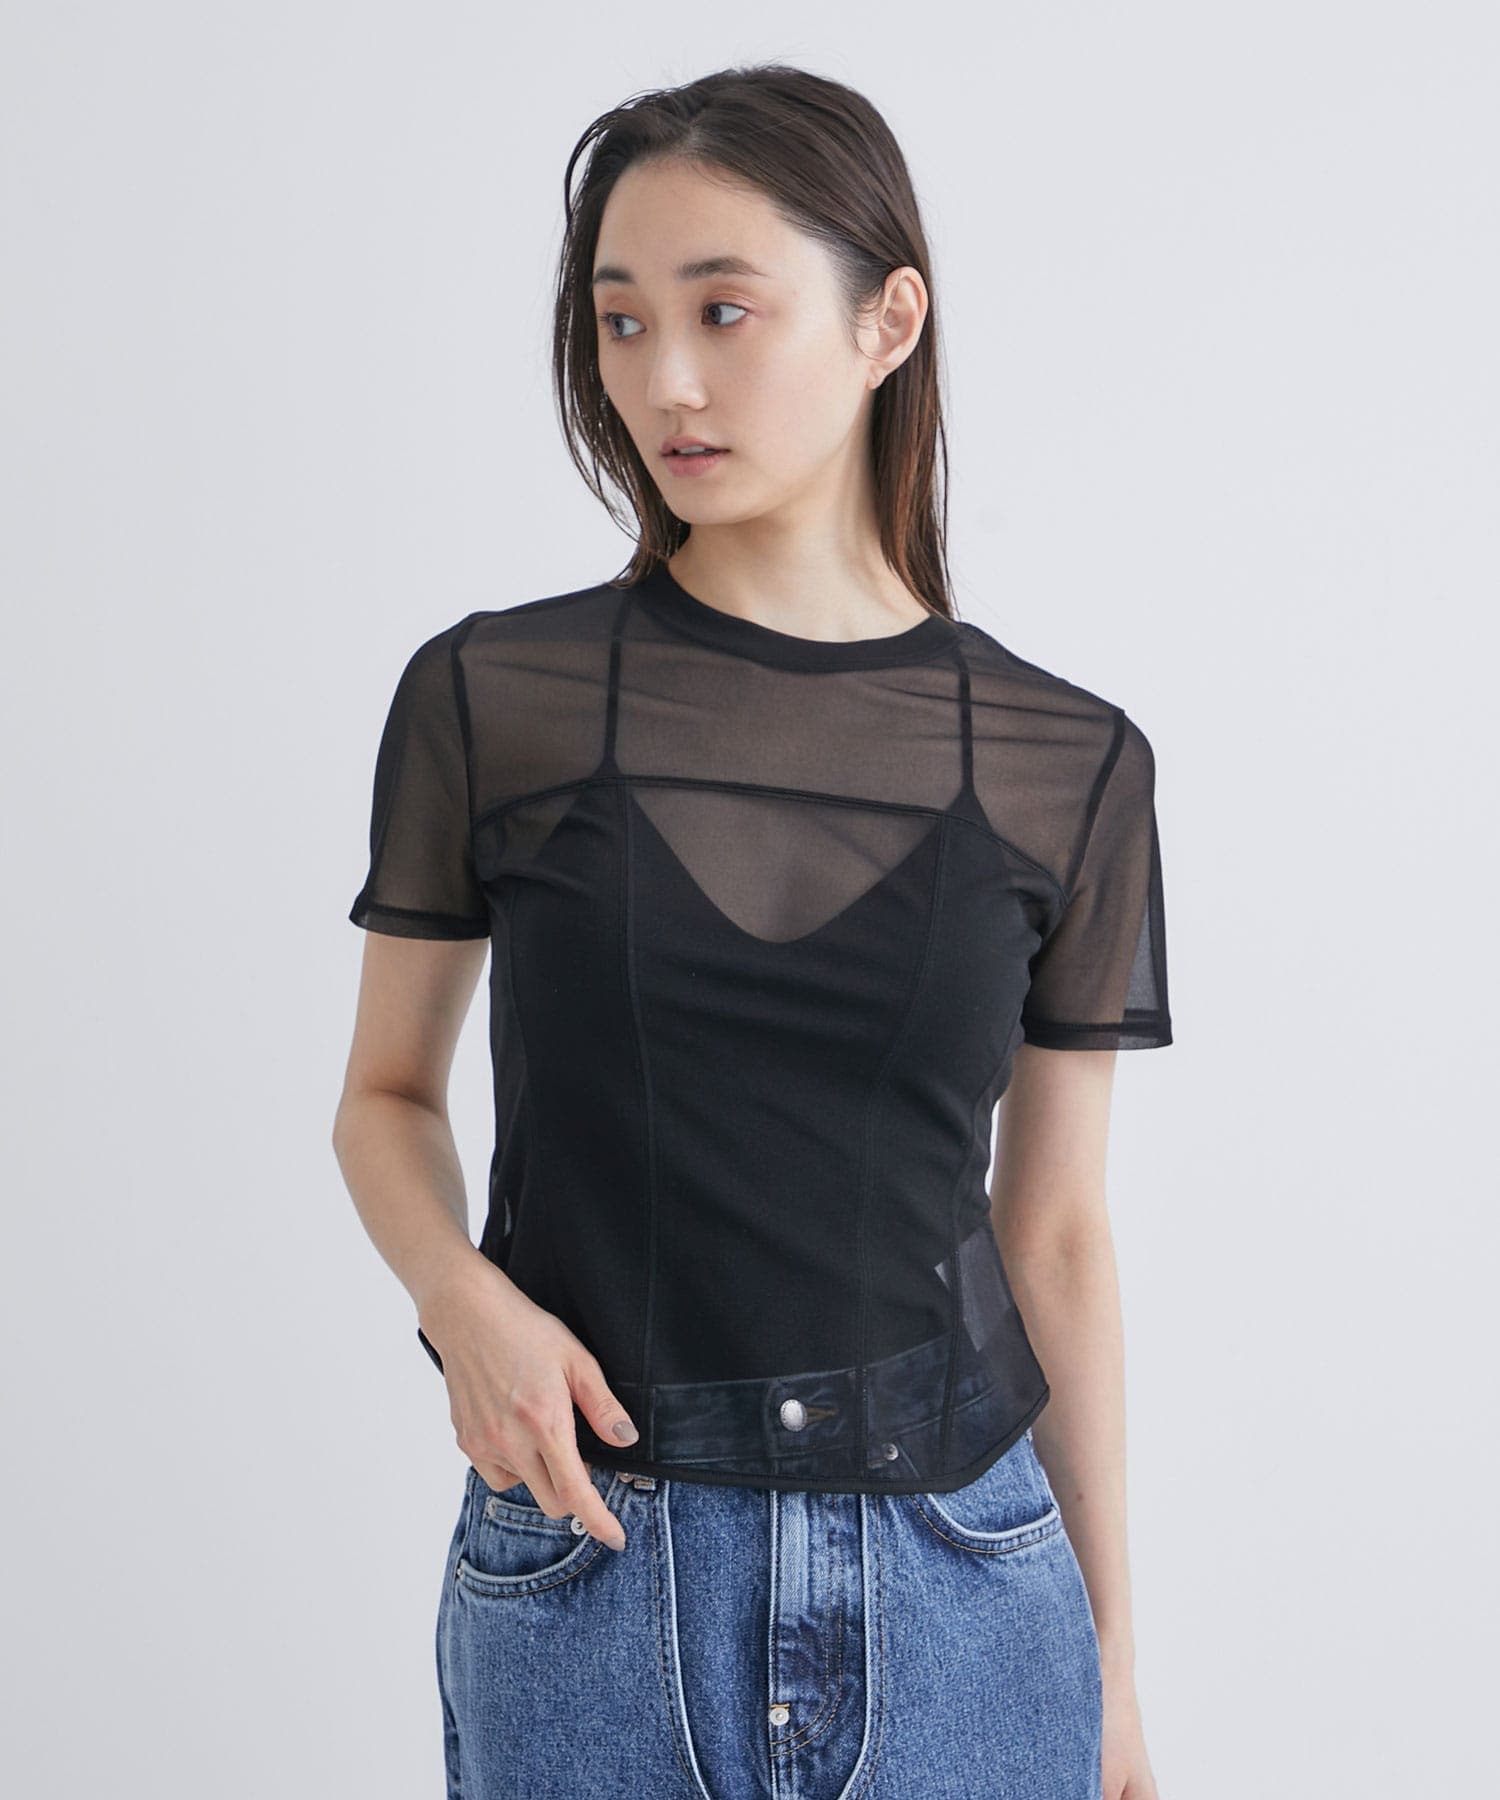 SEE-THROUGH JERSEY BUSTIER T-SHIRTS